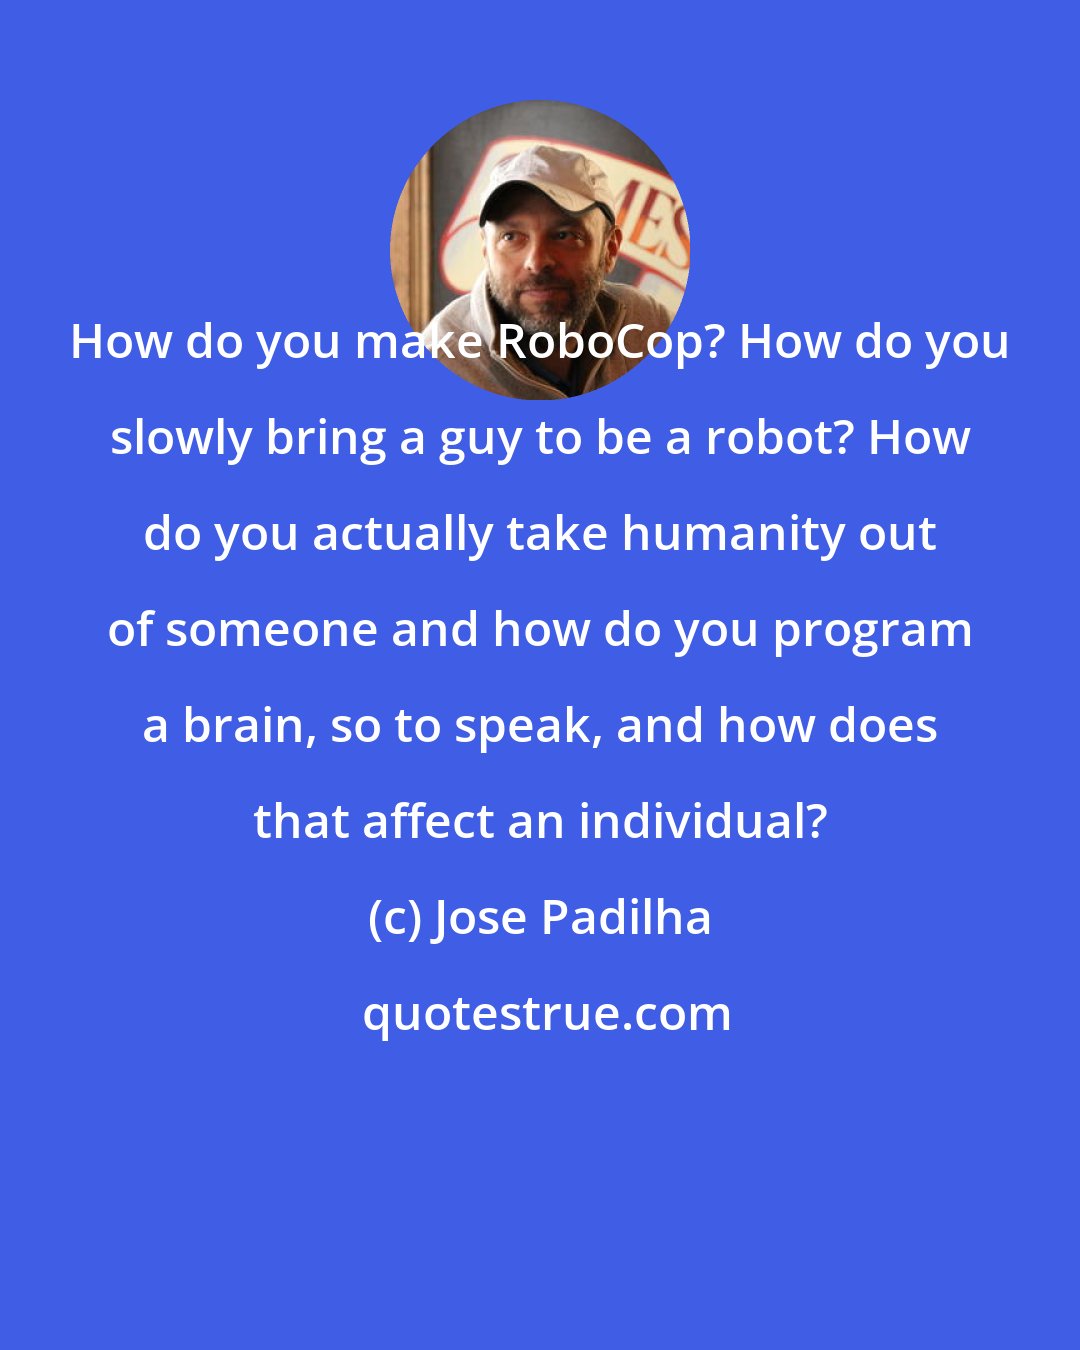 Jose Padilha: How do you make RoboCop? How do you slowly bring a guy to be a robot? How do you actually take humanity out of someone and how do you program a brain, so to speak, and how does that affect an individual?